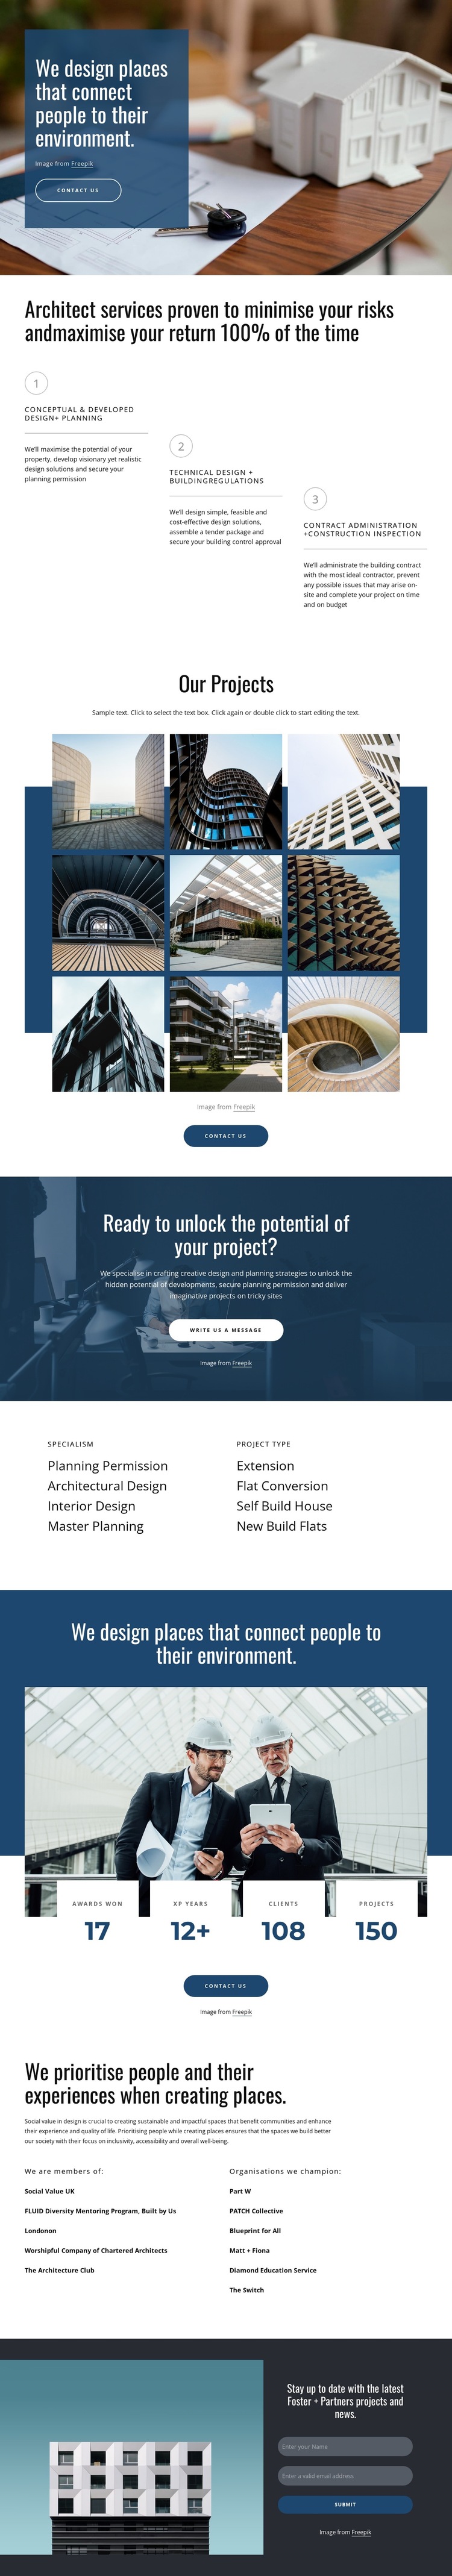 We design amazing projects HTML5 Template